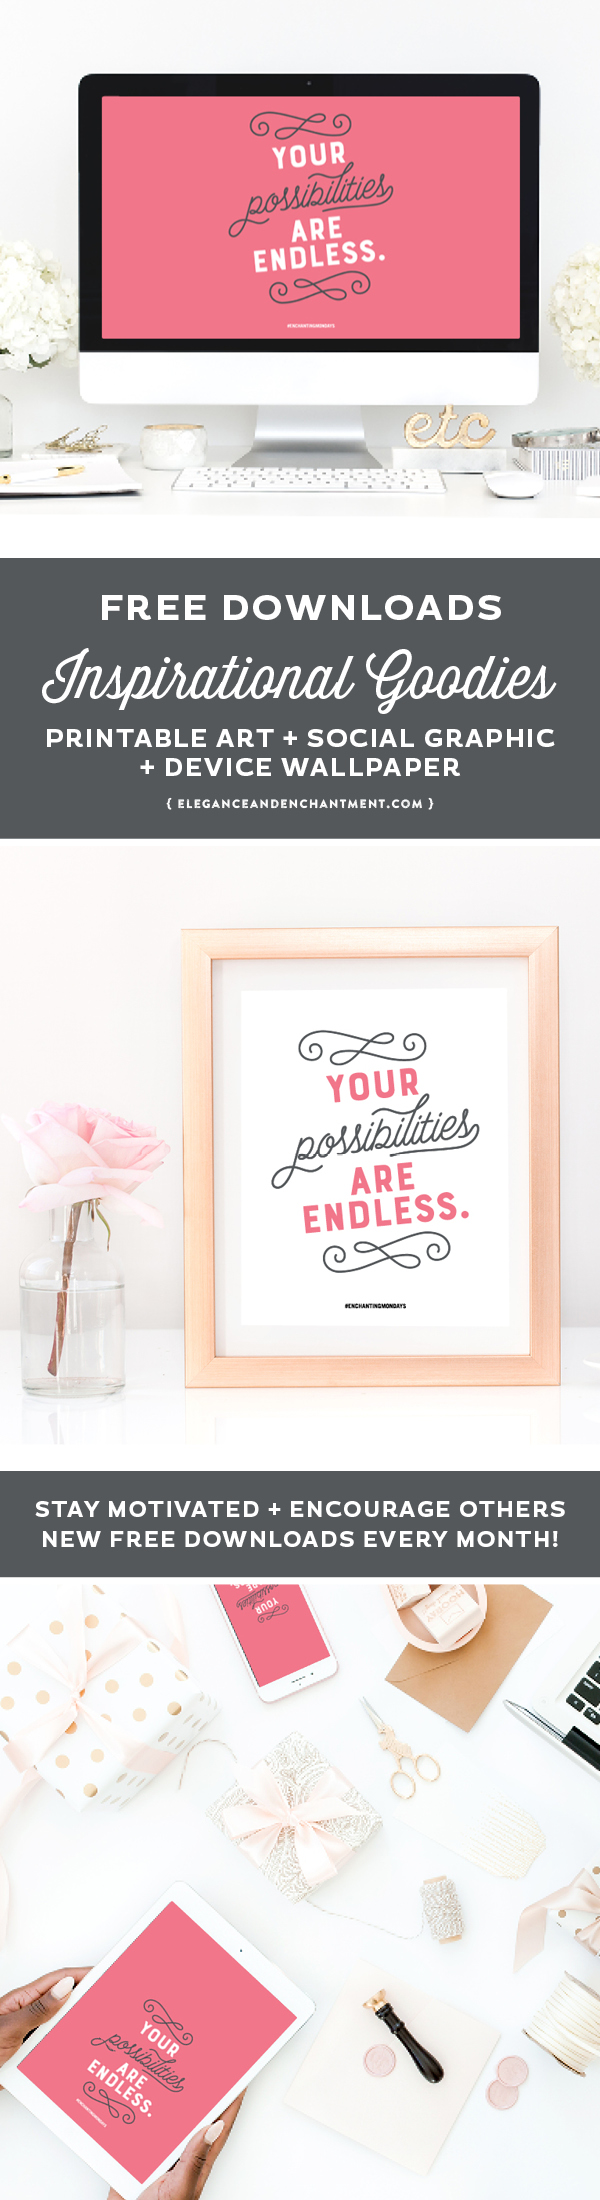 Your possibilities are endless. Enjoy these free inspirational downloads including printable art, a social graphic, and device wallpaper for you phone, tablet and desktop. New motivational designs shared every month! Spread the love by sharing with a friend! // Designs from Elegance + Enchantment